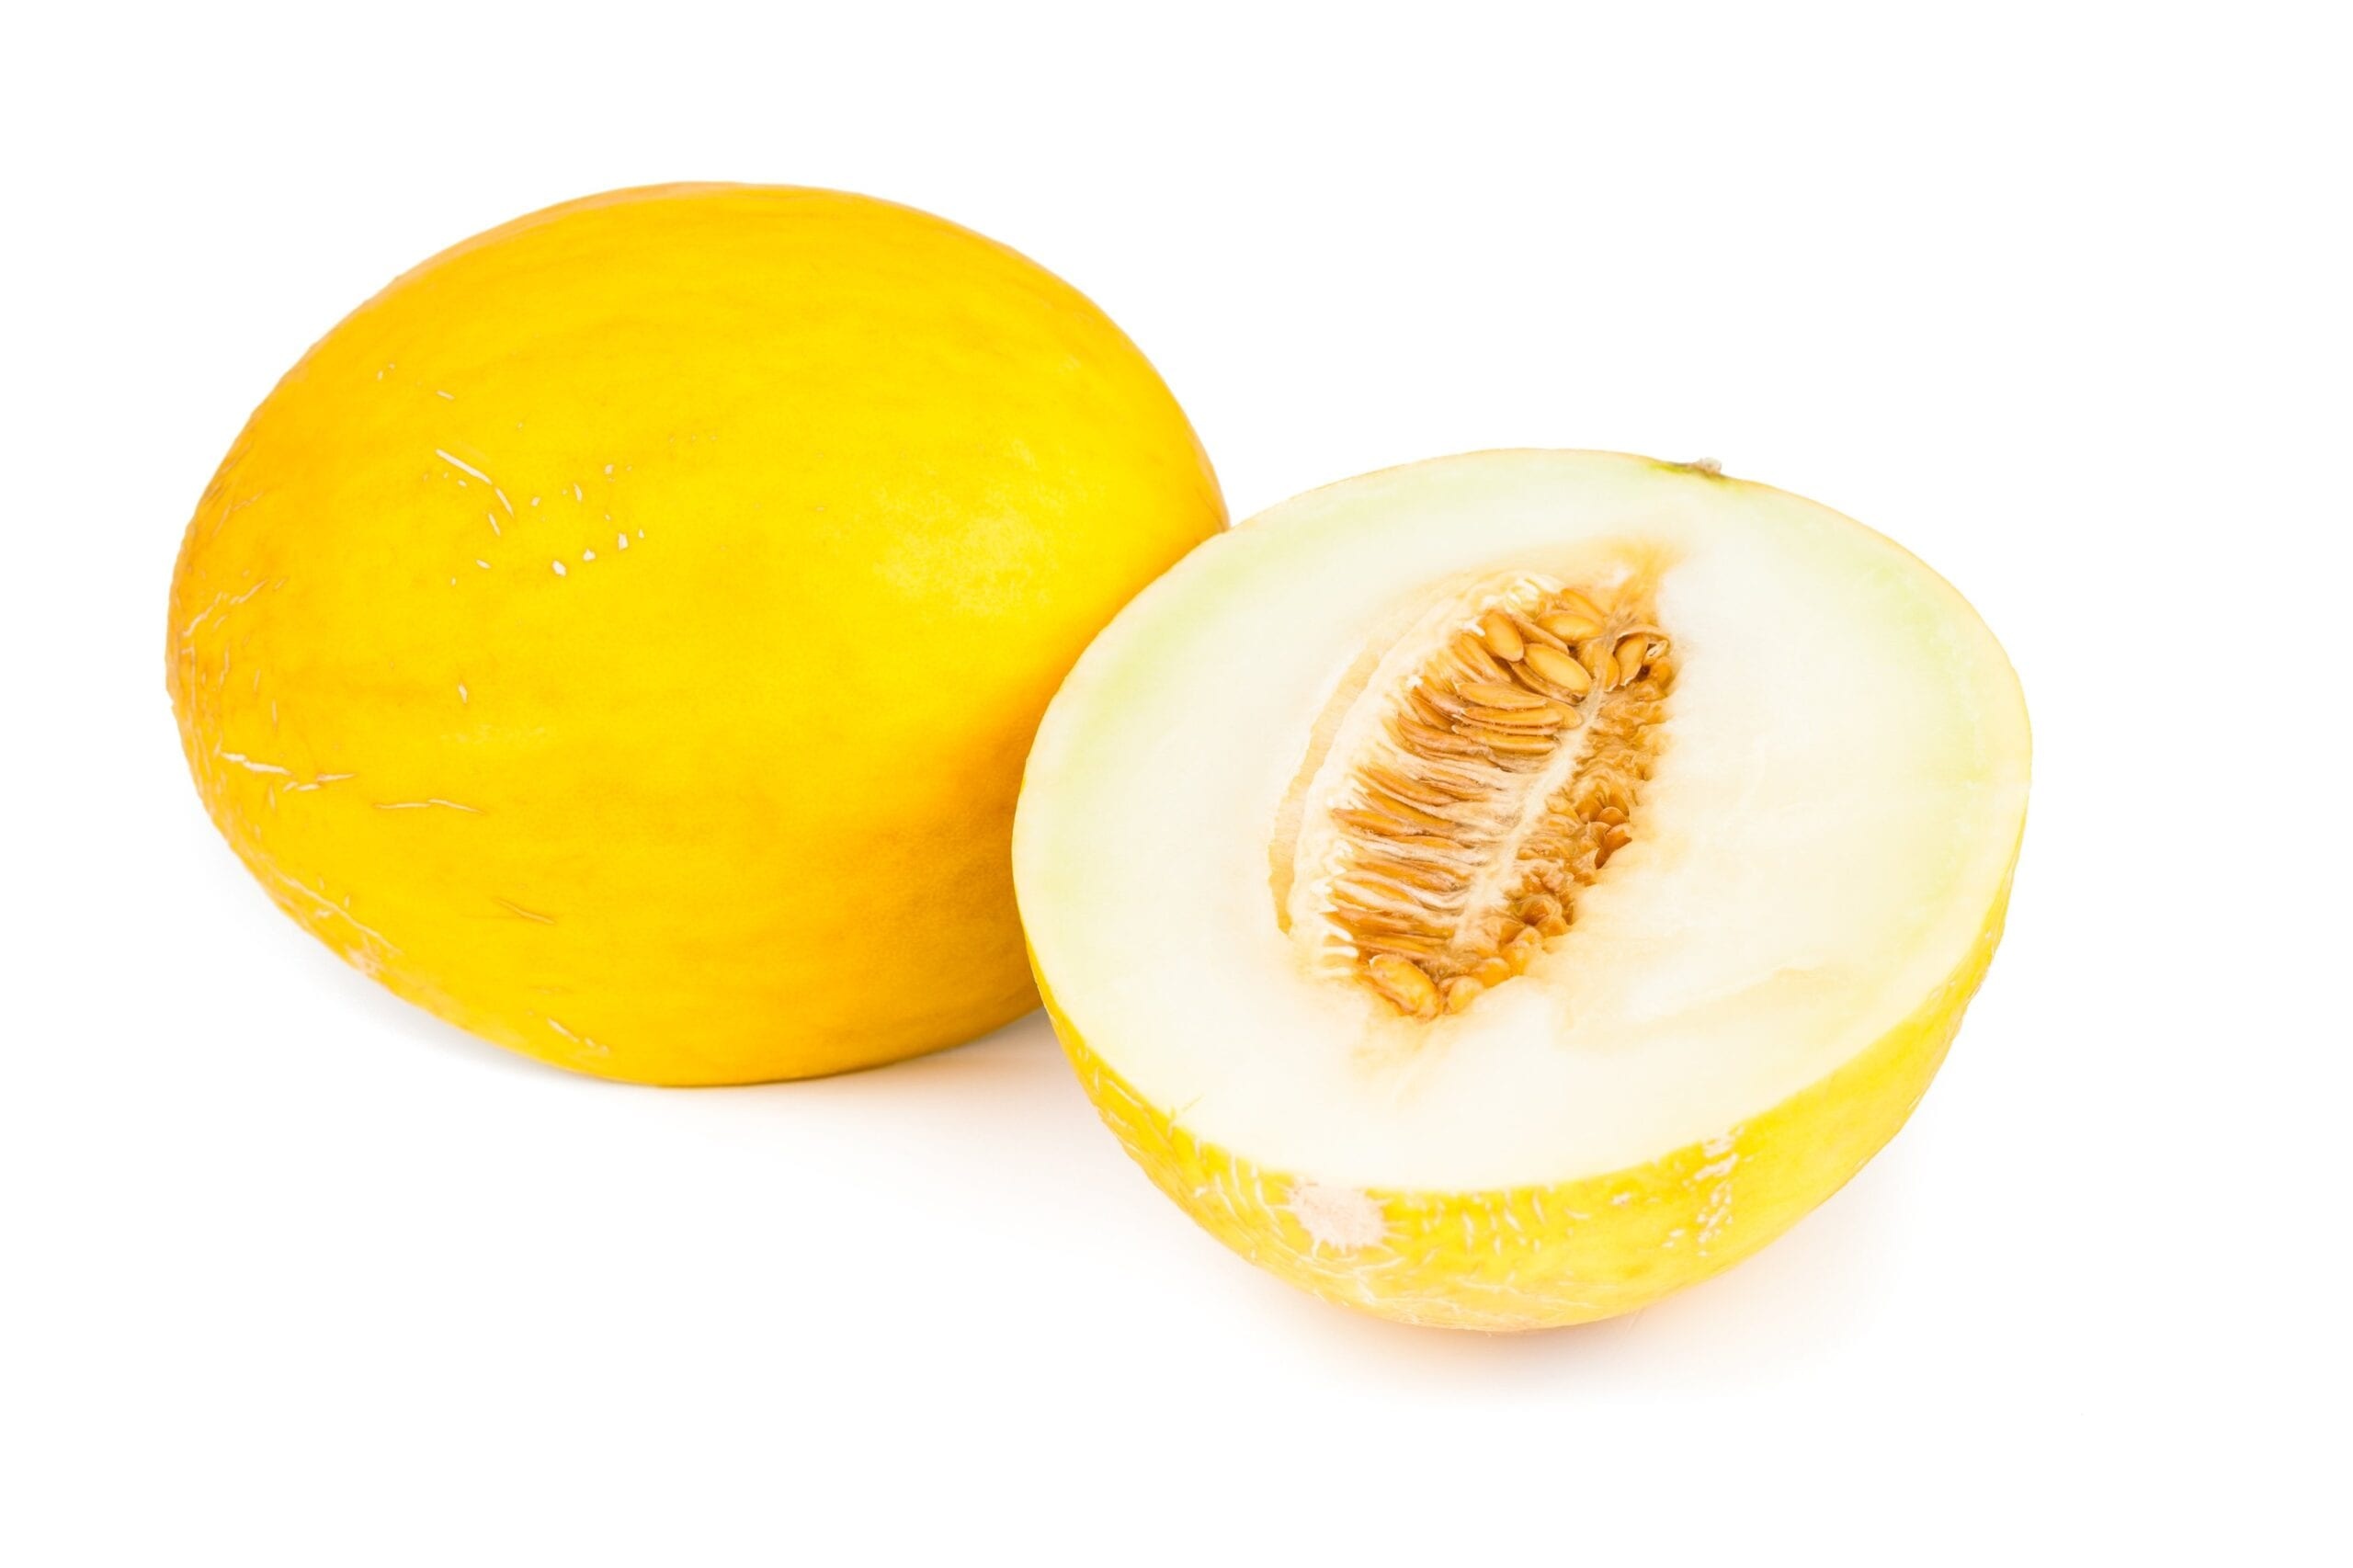 Melon: Honeydew, The American name for the White Antibes cultivar. 2560x1710 HD Wallpaper.